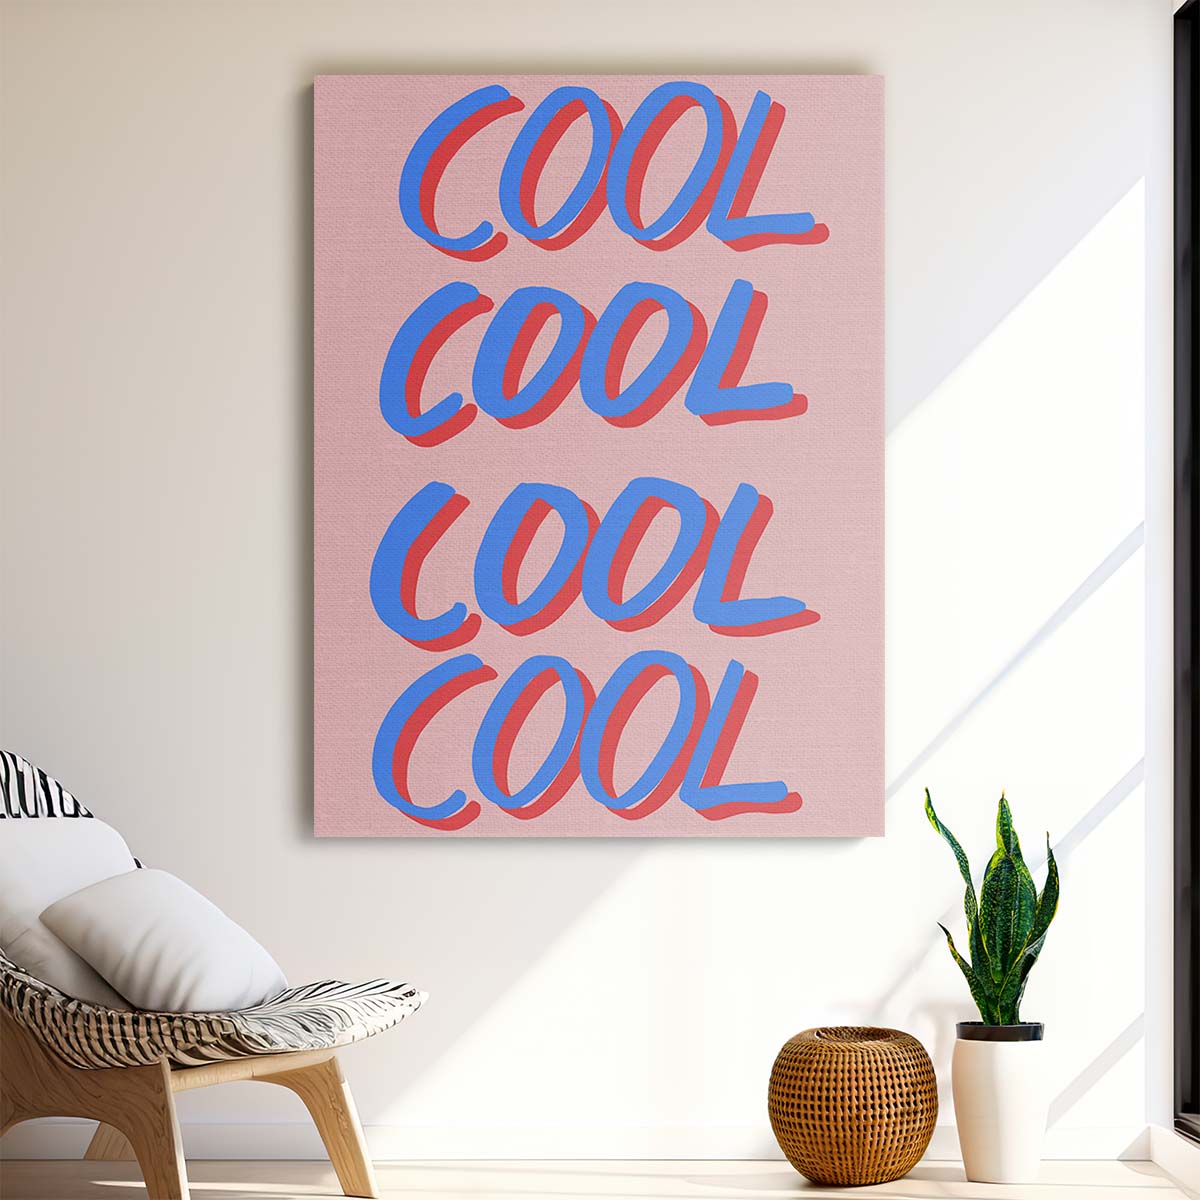 Mid-Century Motivational Quote Illustration, Vintage Pink and Blue Typography Wall Art by Luxuriance Designs, made in USA